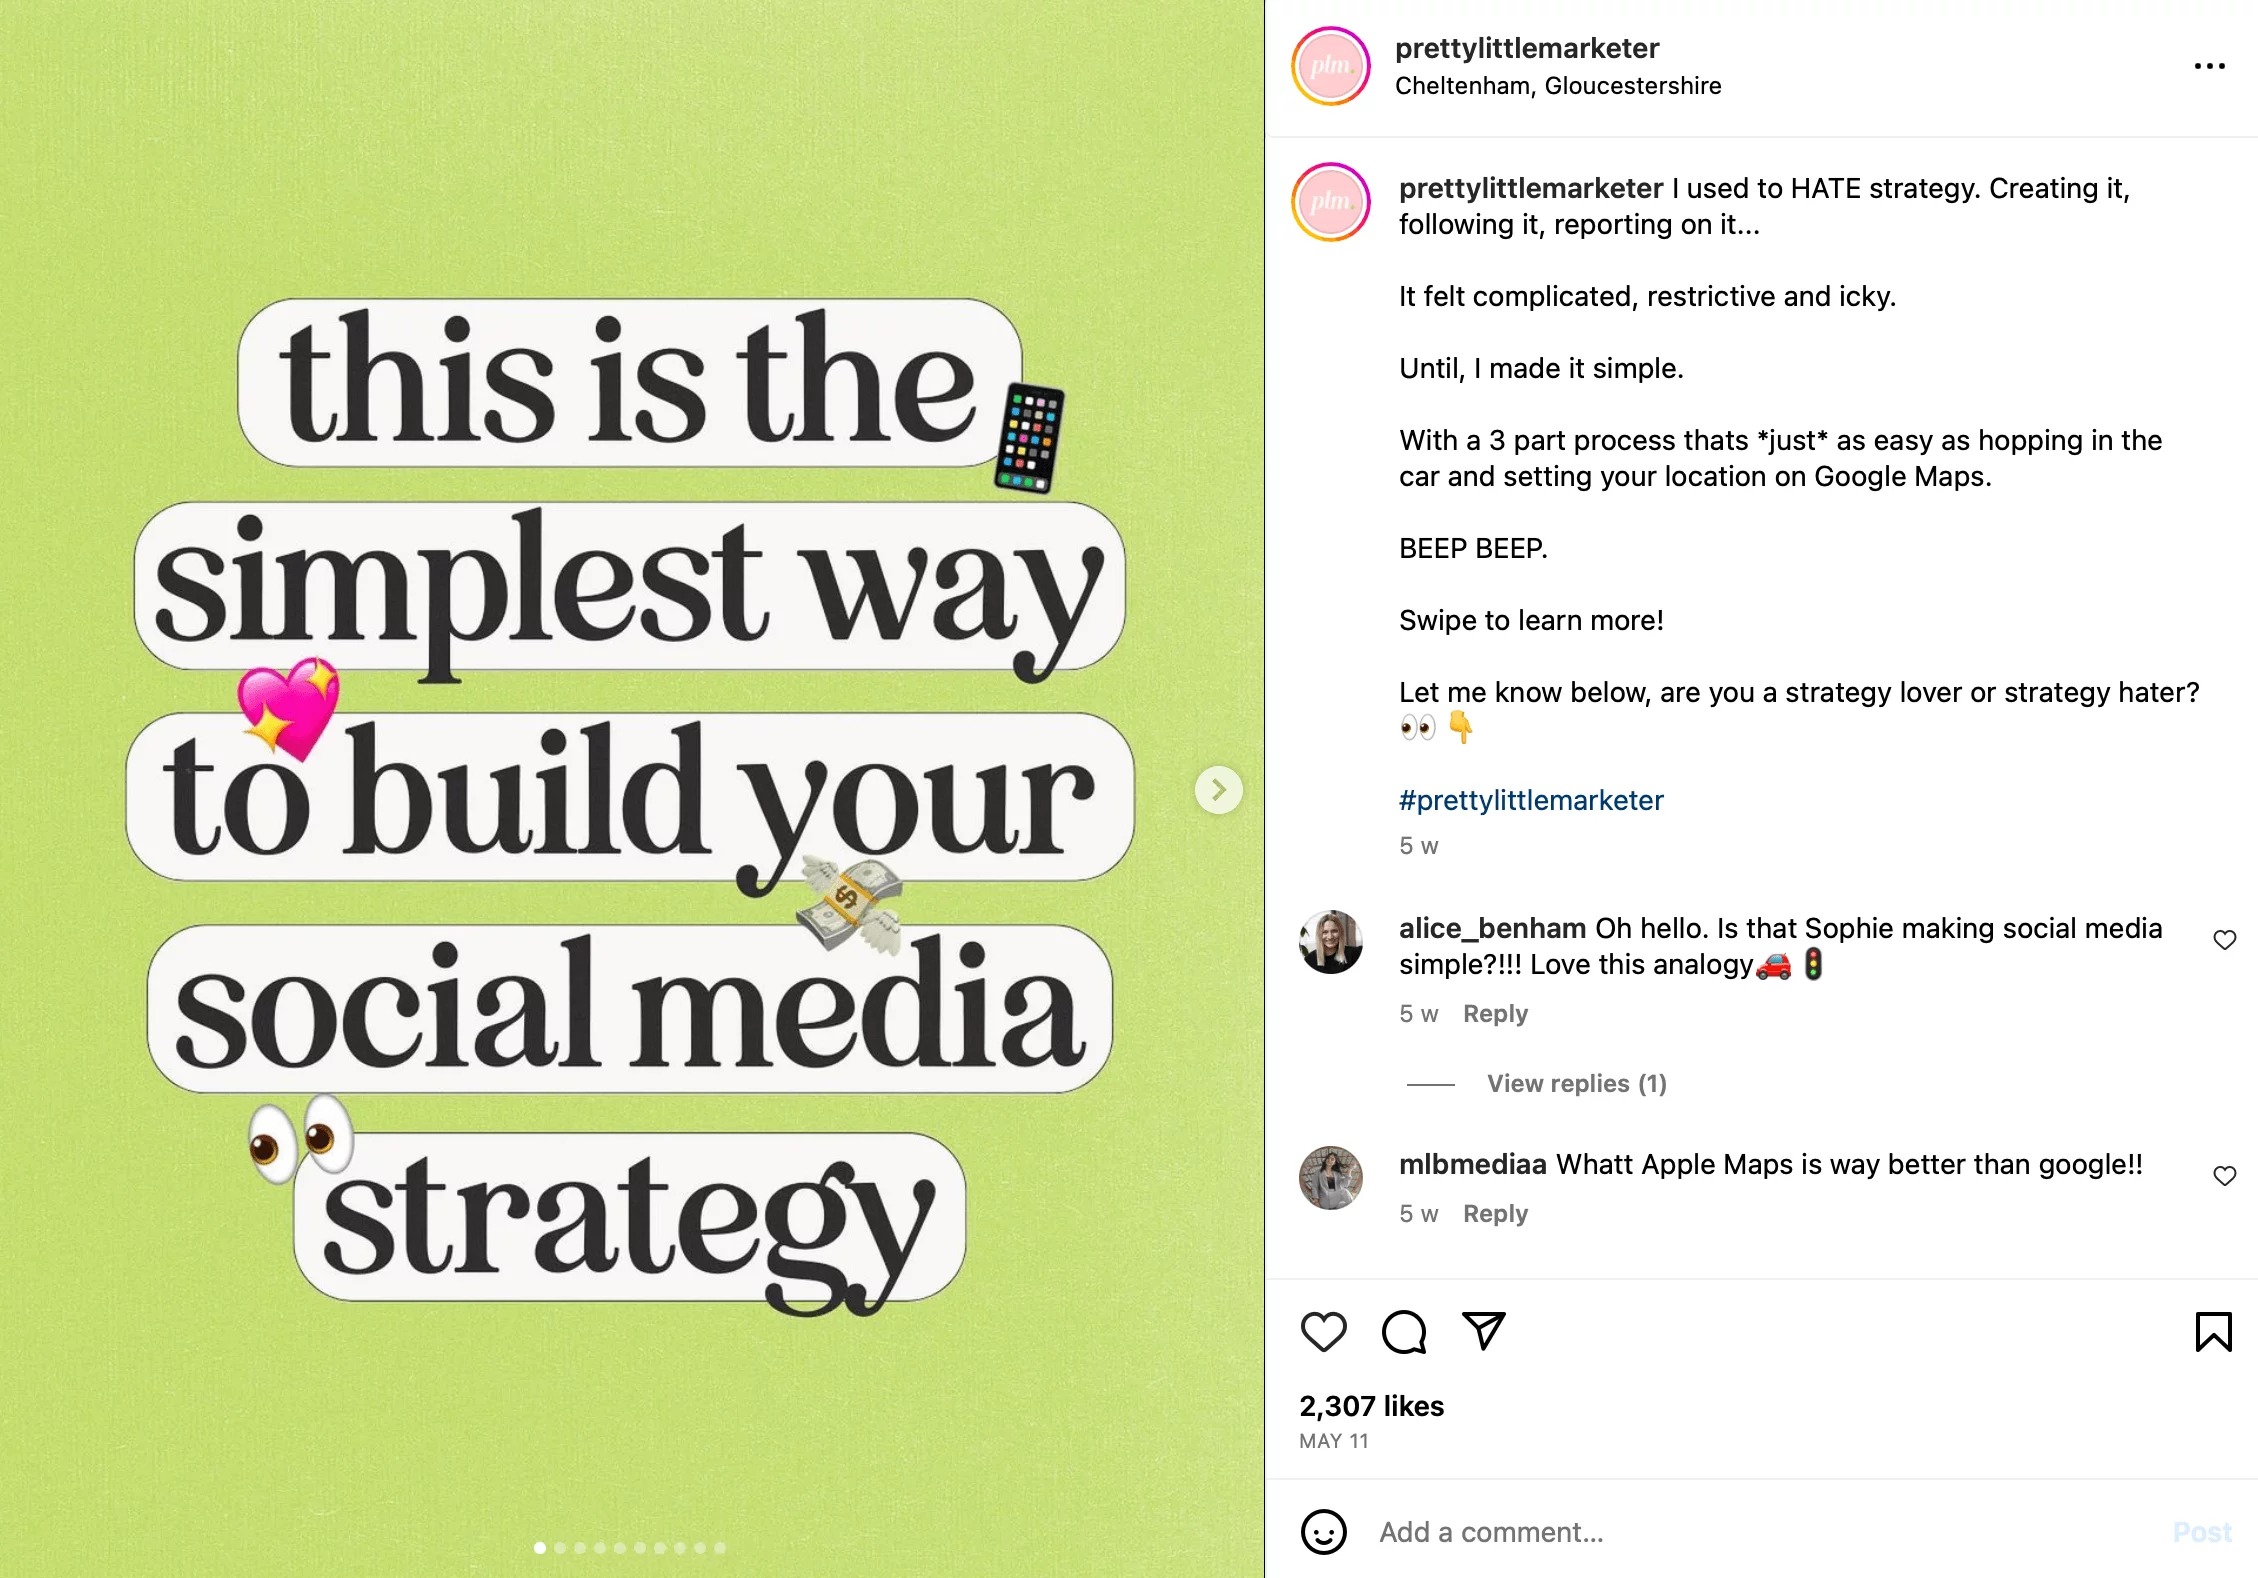 Instagram carousel from @prettylittlemarketer showing the message "this is the simplest way to build your social media strategy" on a light green background.